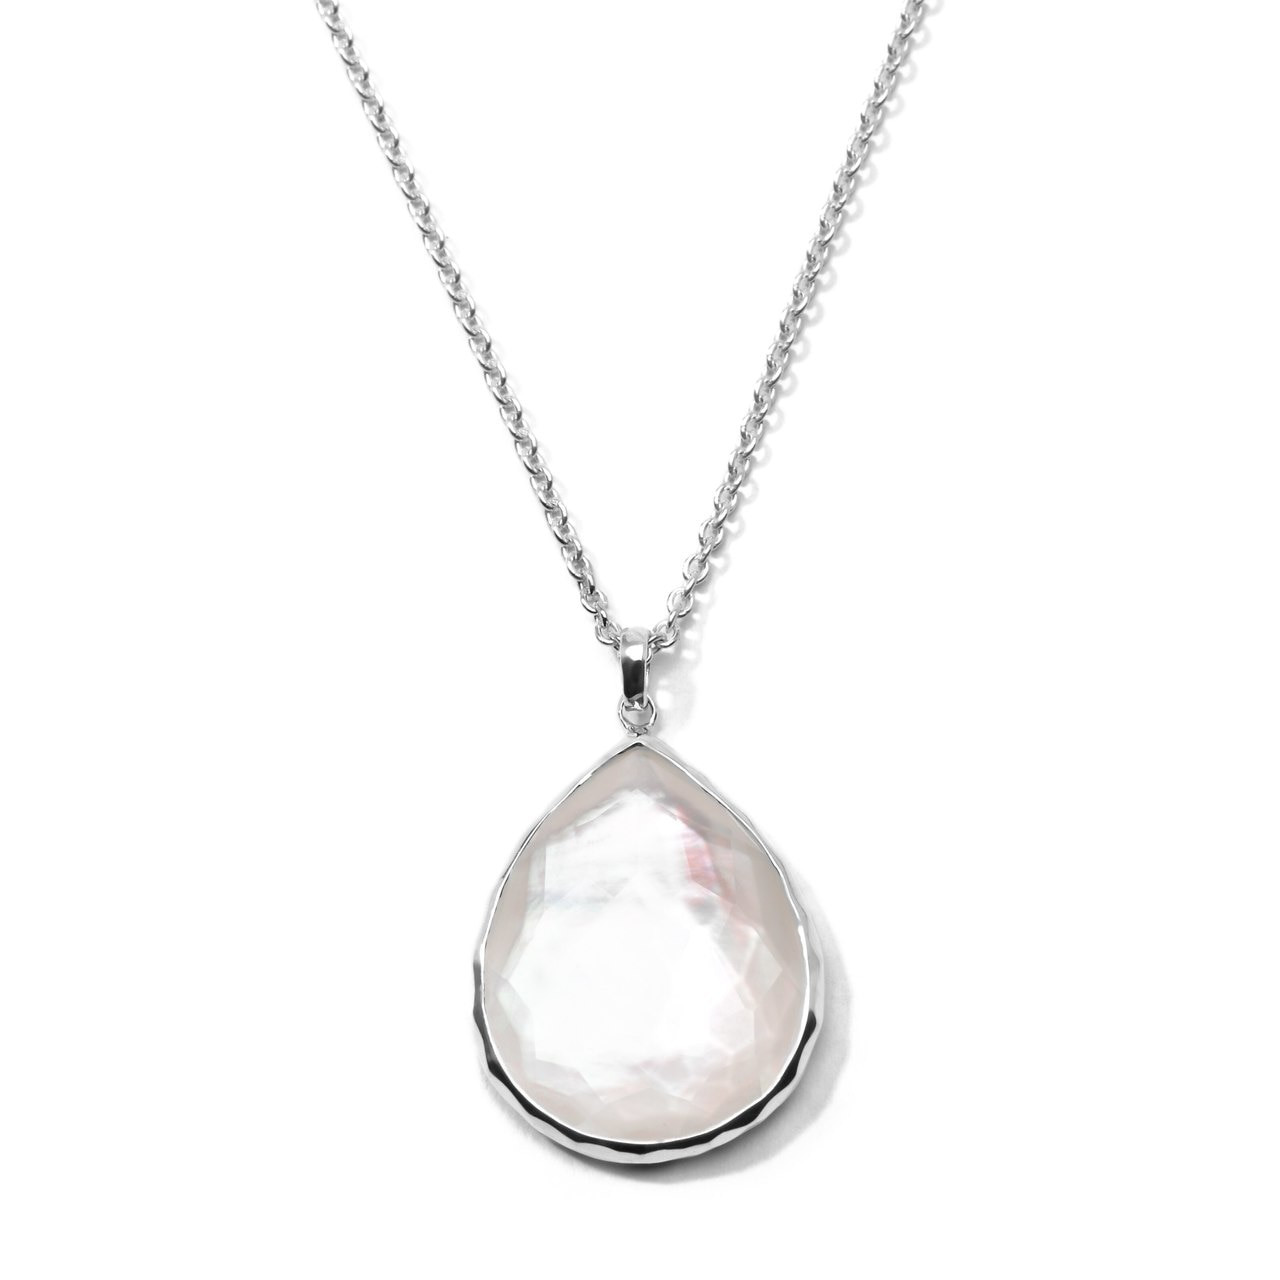 South Sea Pearl Pendant Hand-Crafted in NYC | Gifted Unique